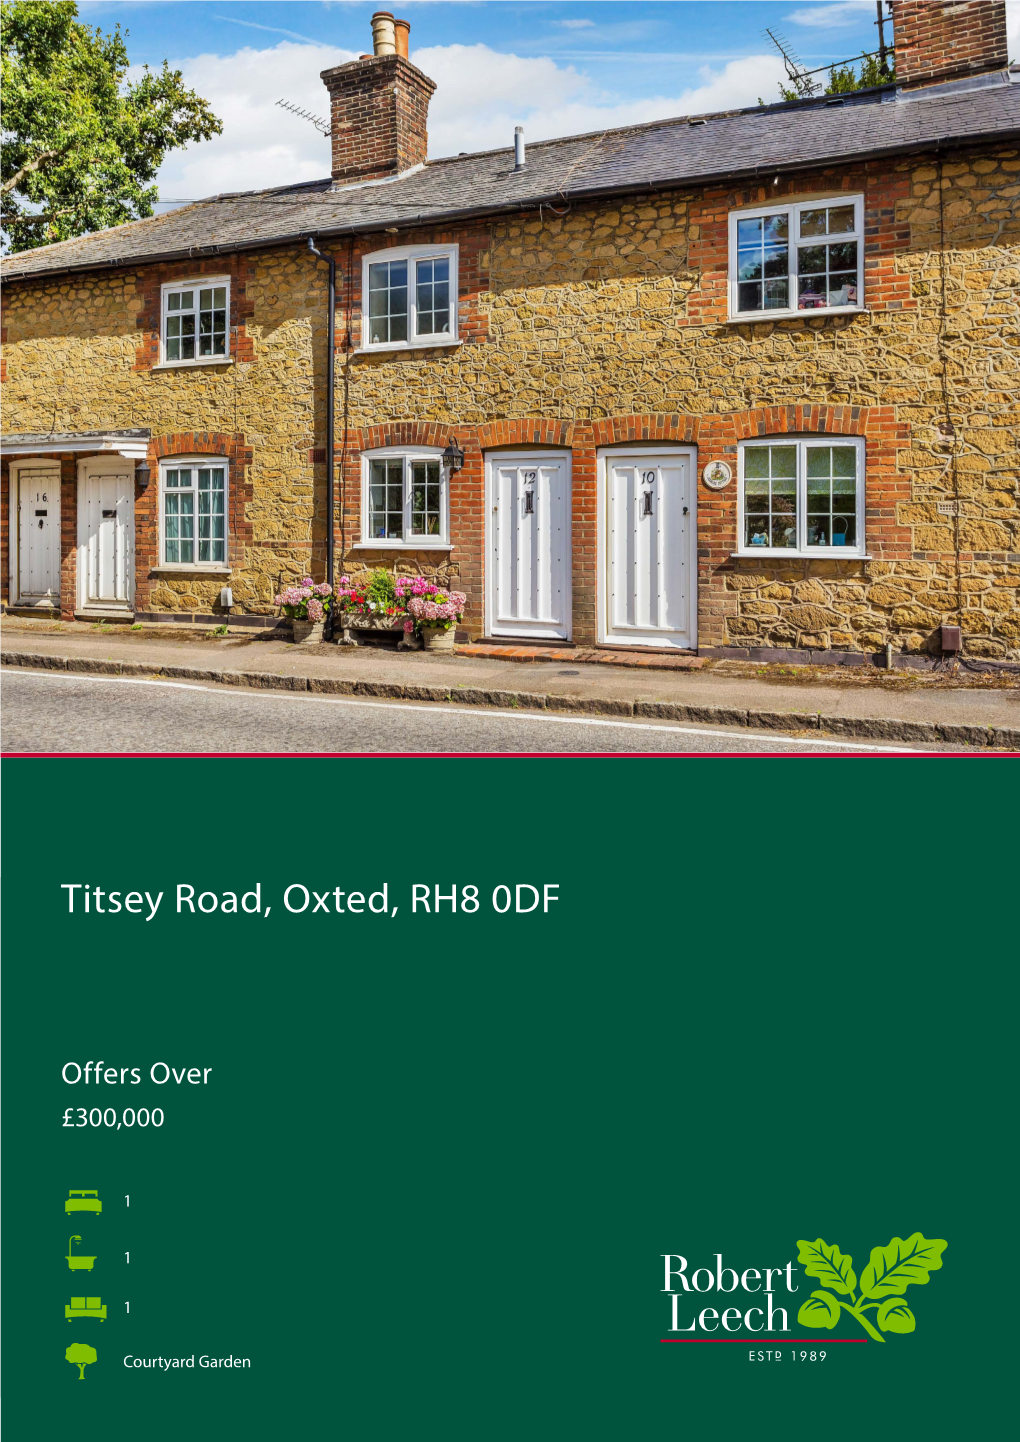 Titsey Road, Oxted, RH8 0DF